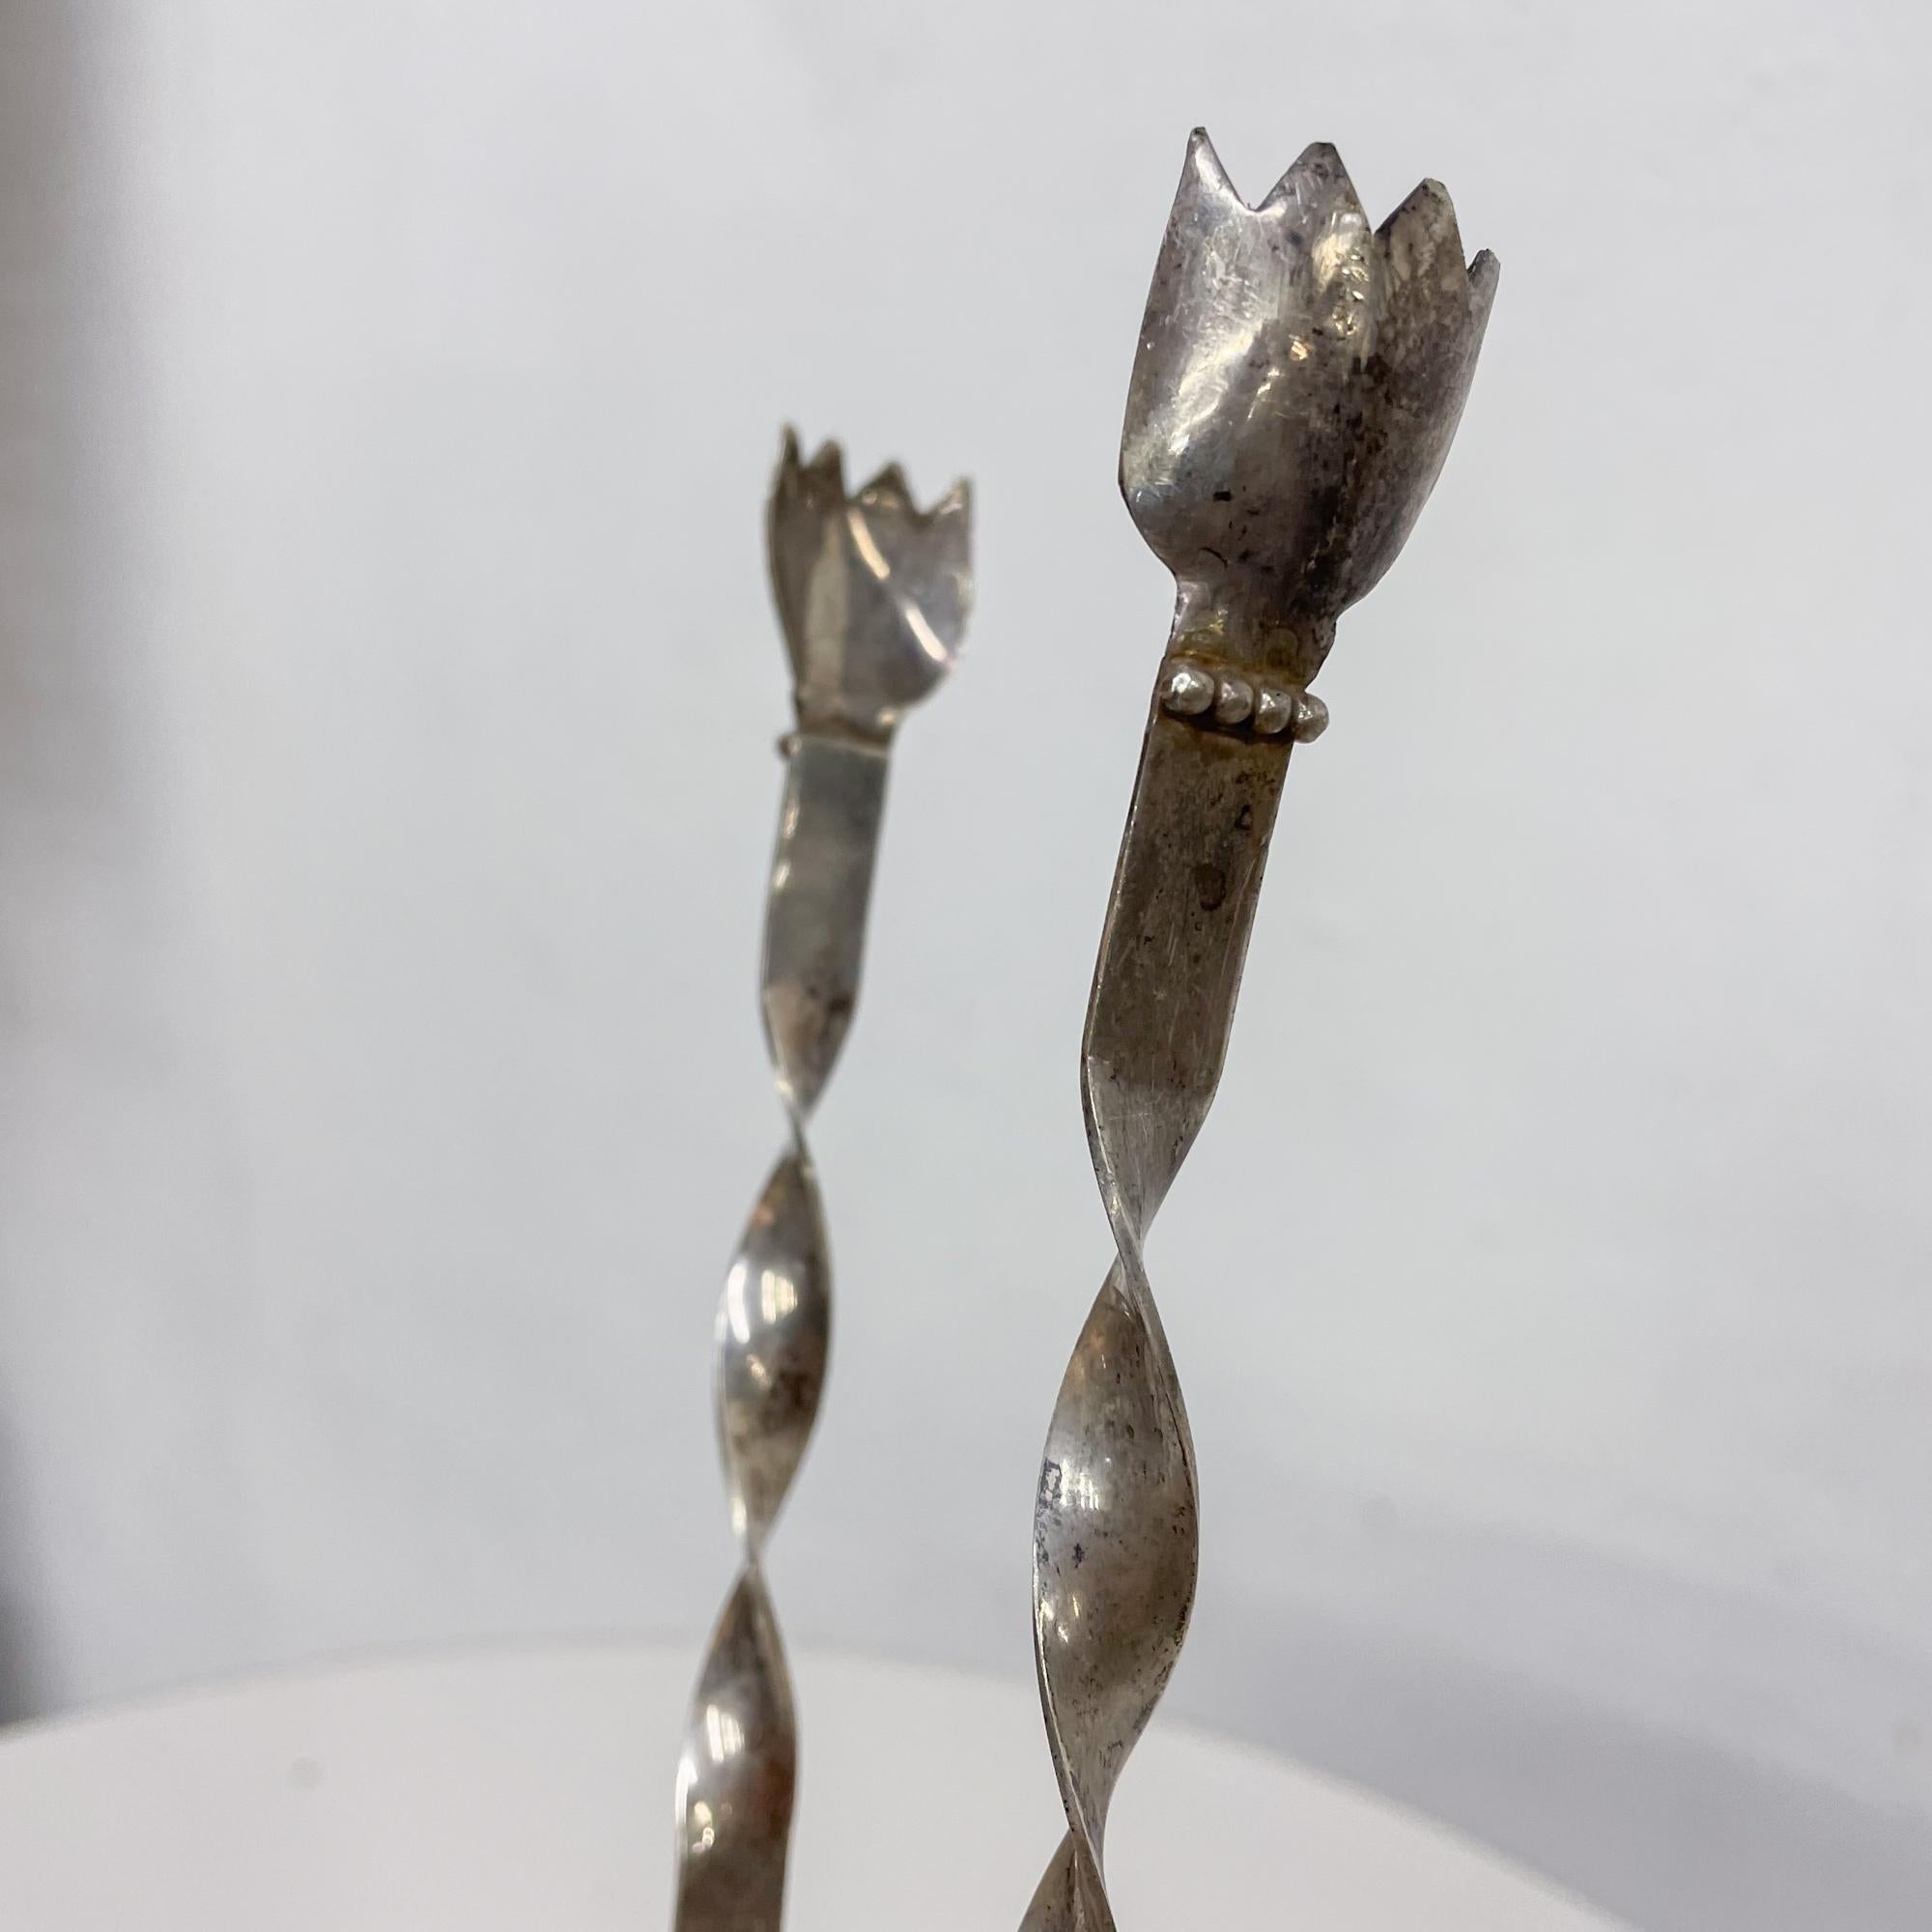 Mid-Century Modern Barware Sculptural Silverplated Ice Tongs Style William Spratling Taxco Mexico